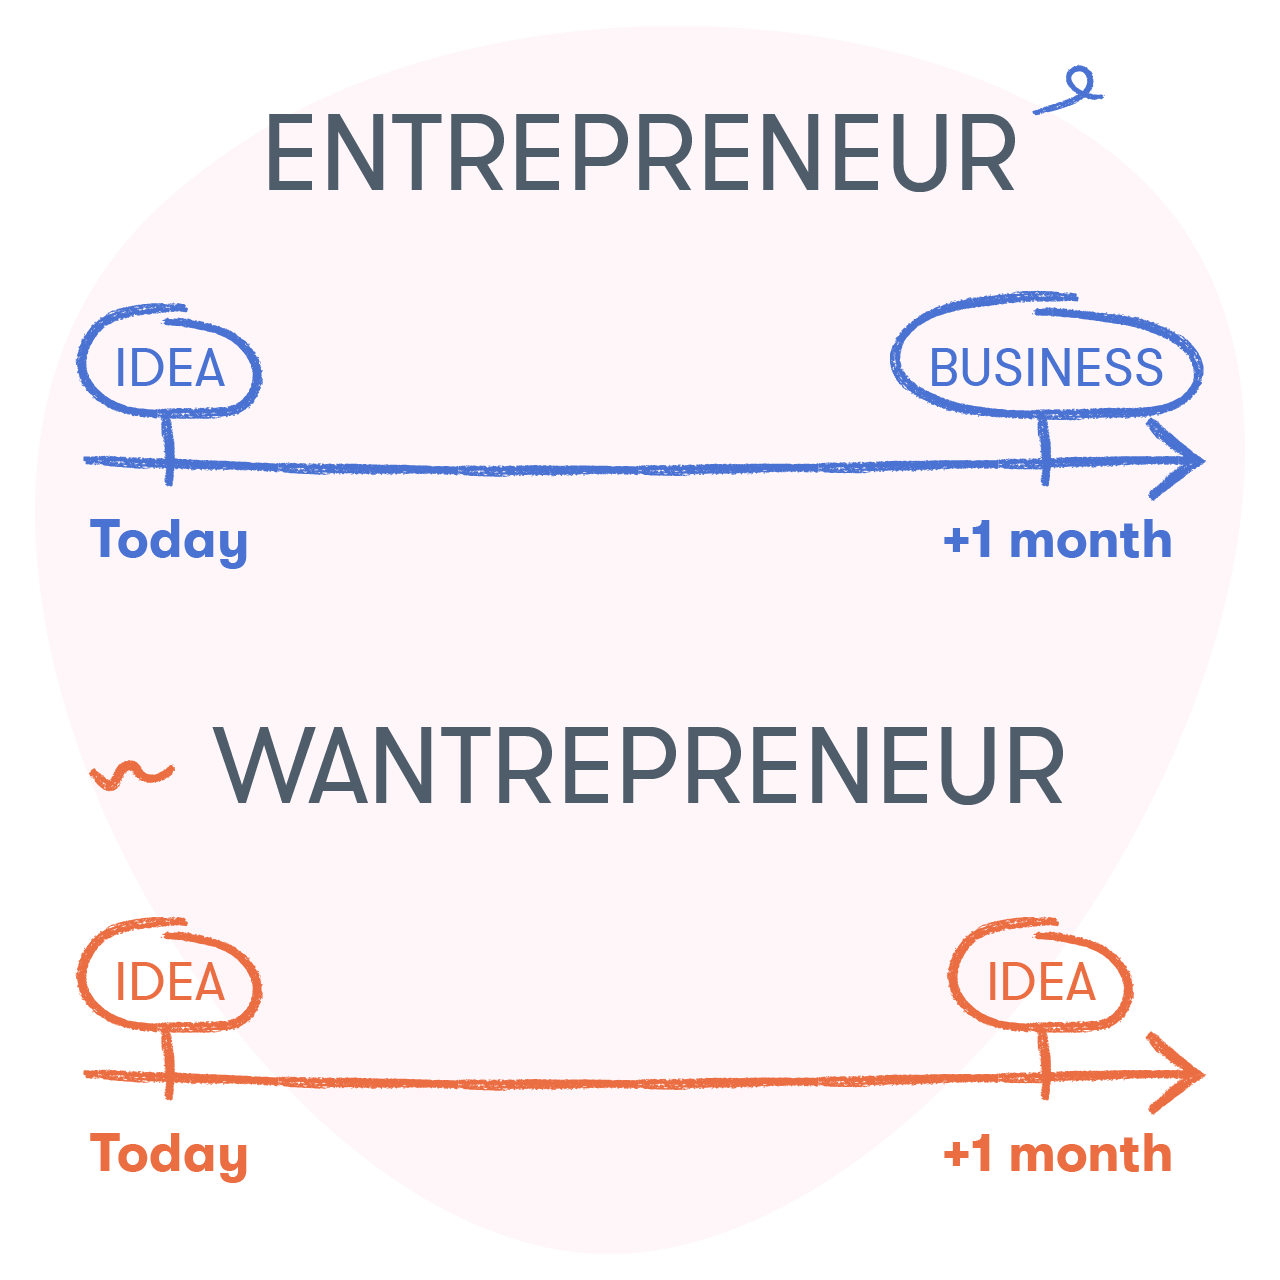 The difference between entrepreneurs and wantrepreneurs